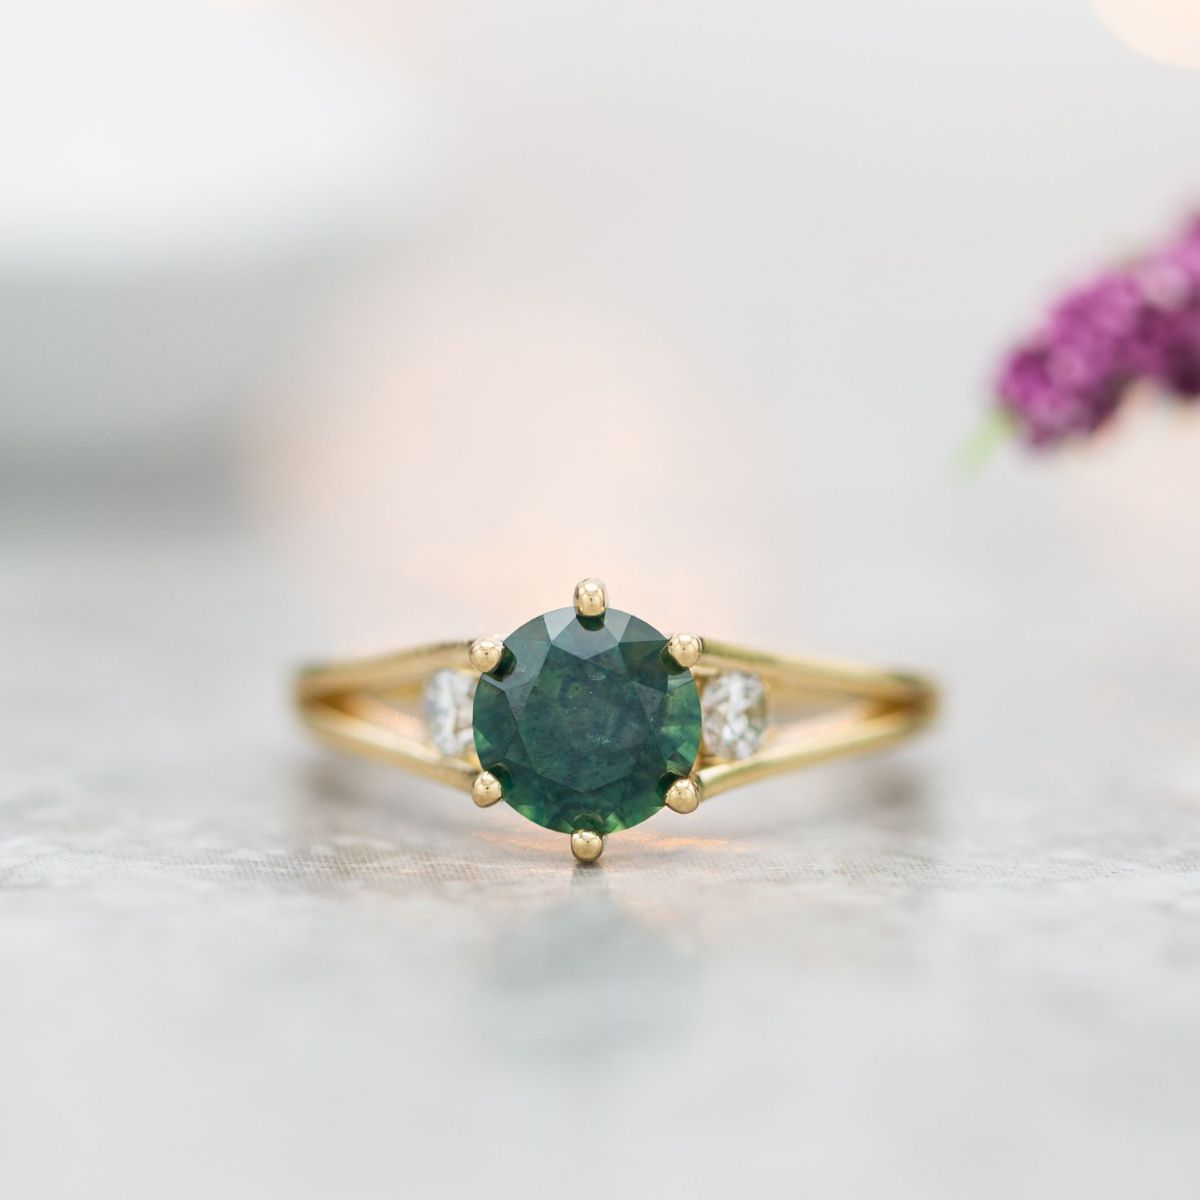 Sapphire Engagement Rings in Every Color | CustomMade.com